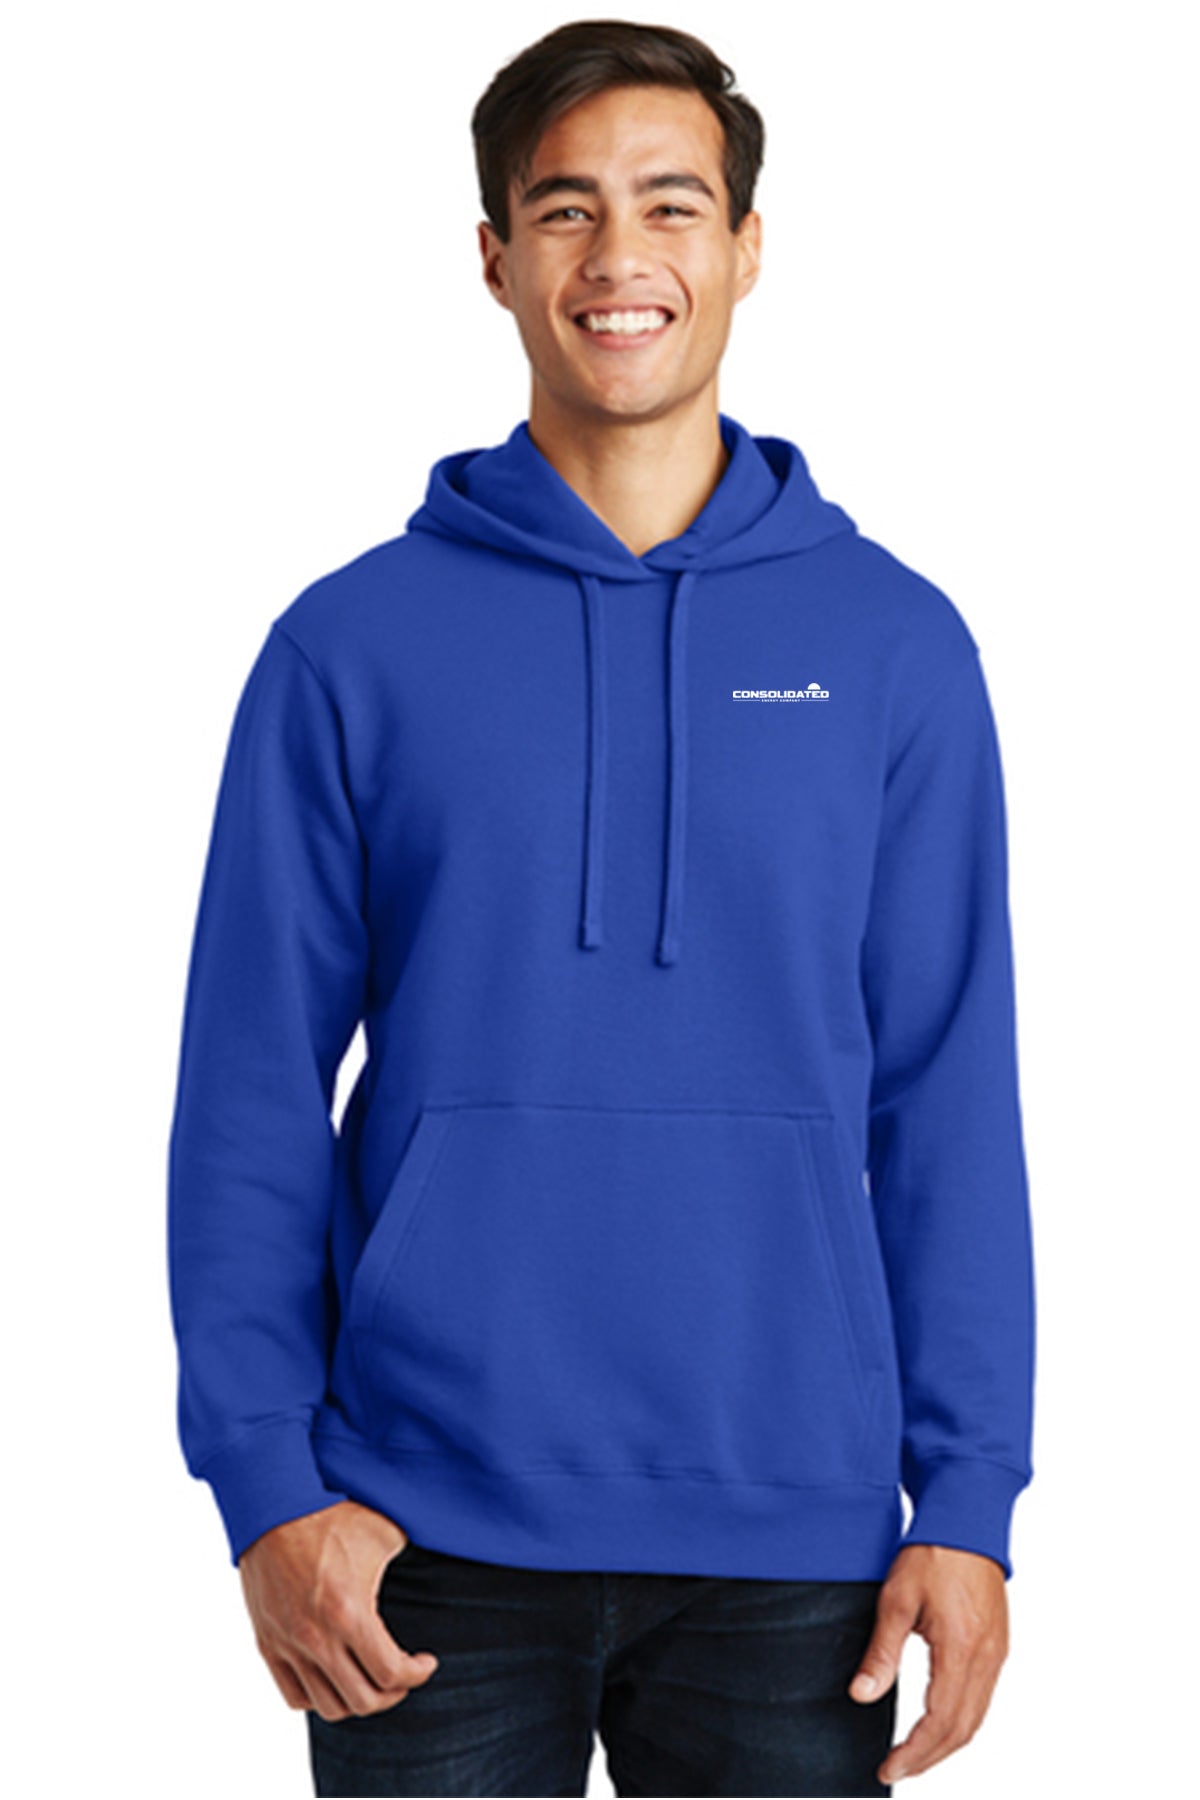 Consolidated Energy Company Premium Hoodie